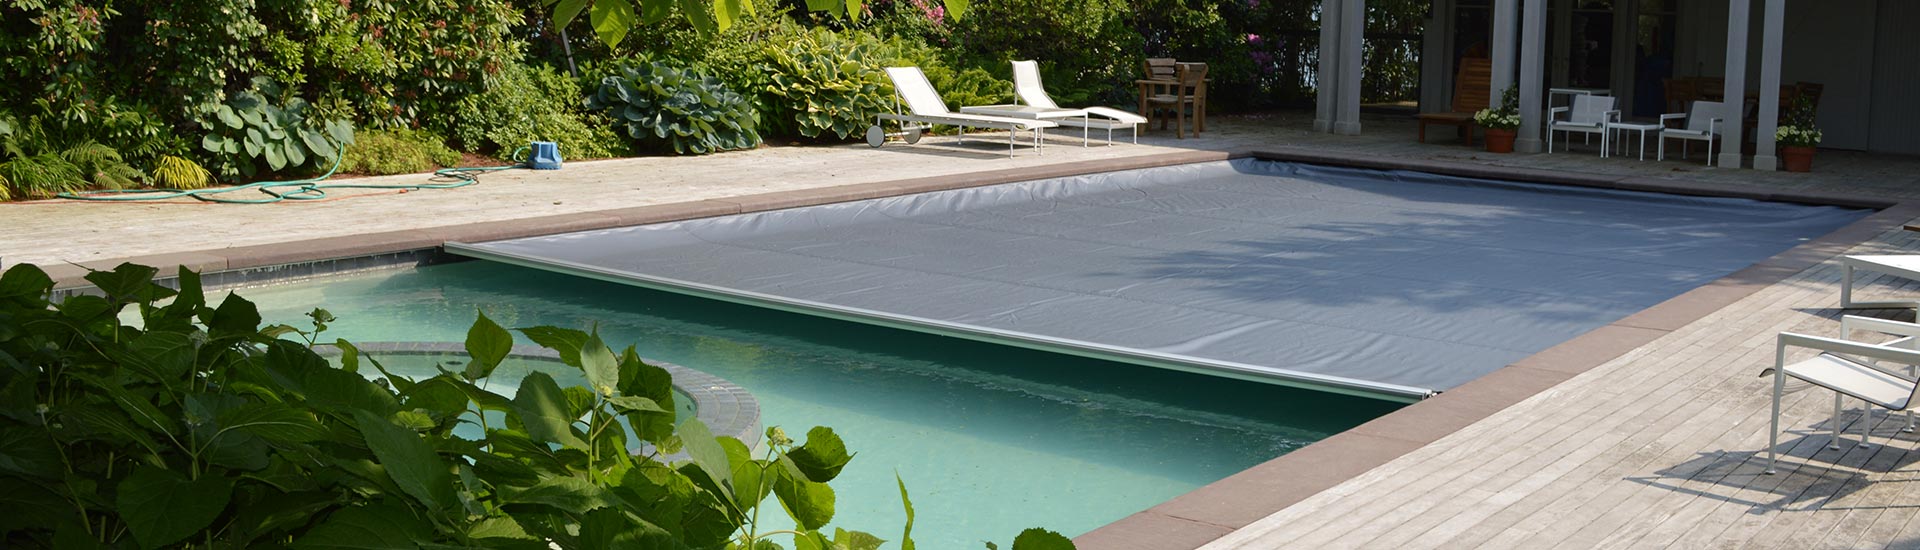 automatic pool cover instead of fence